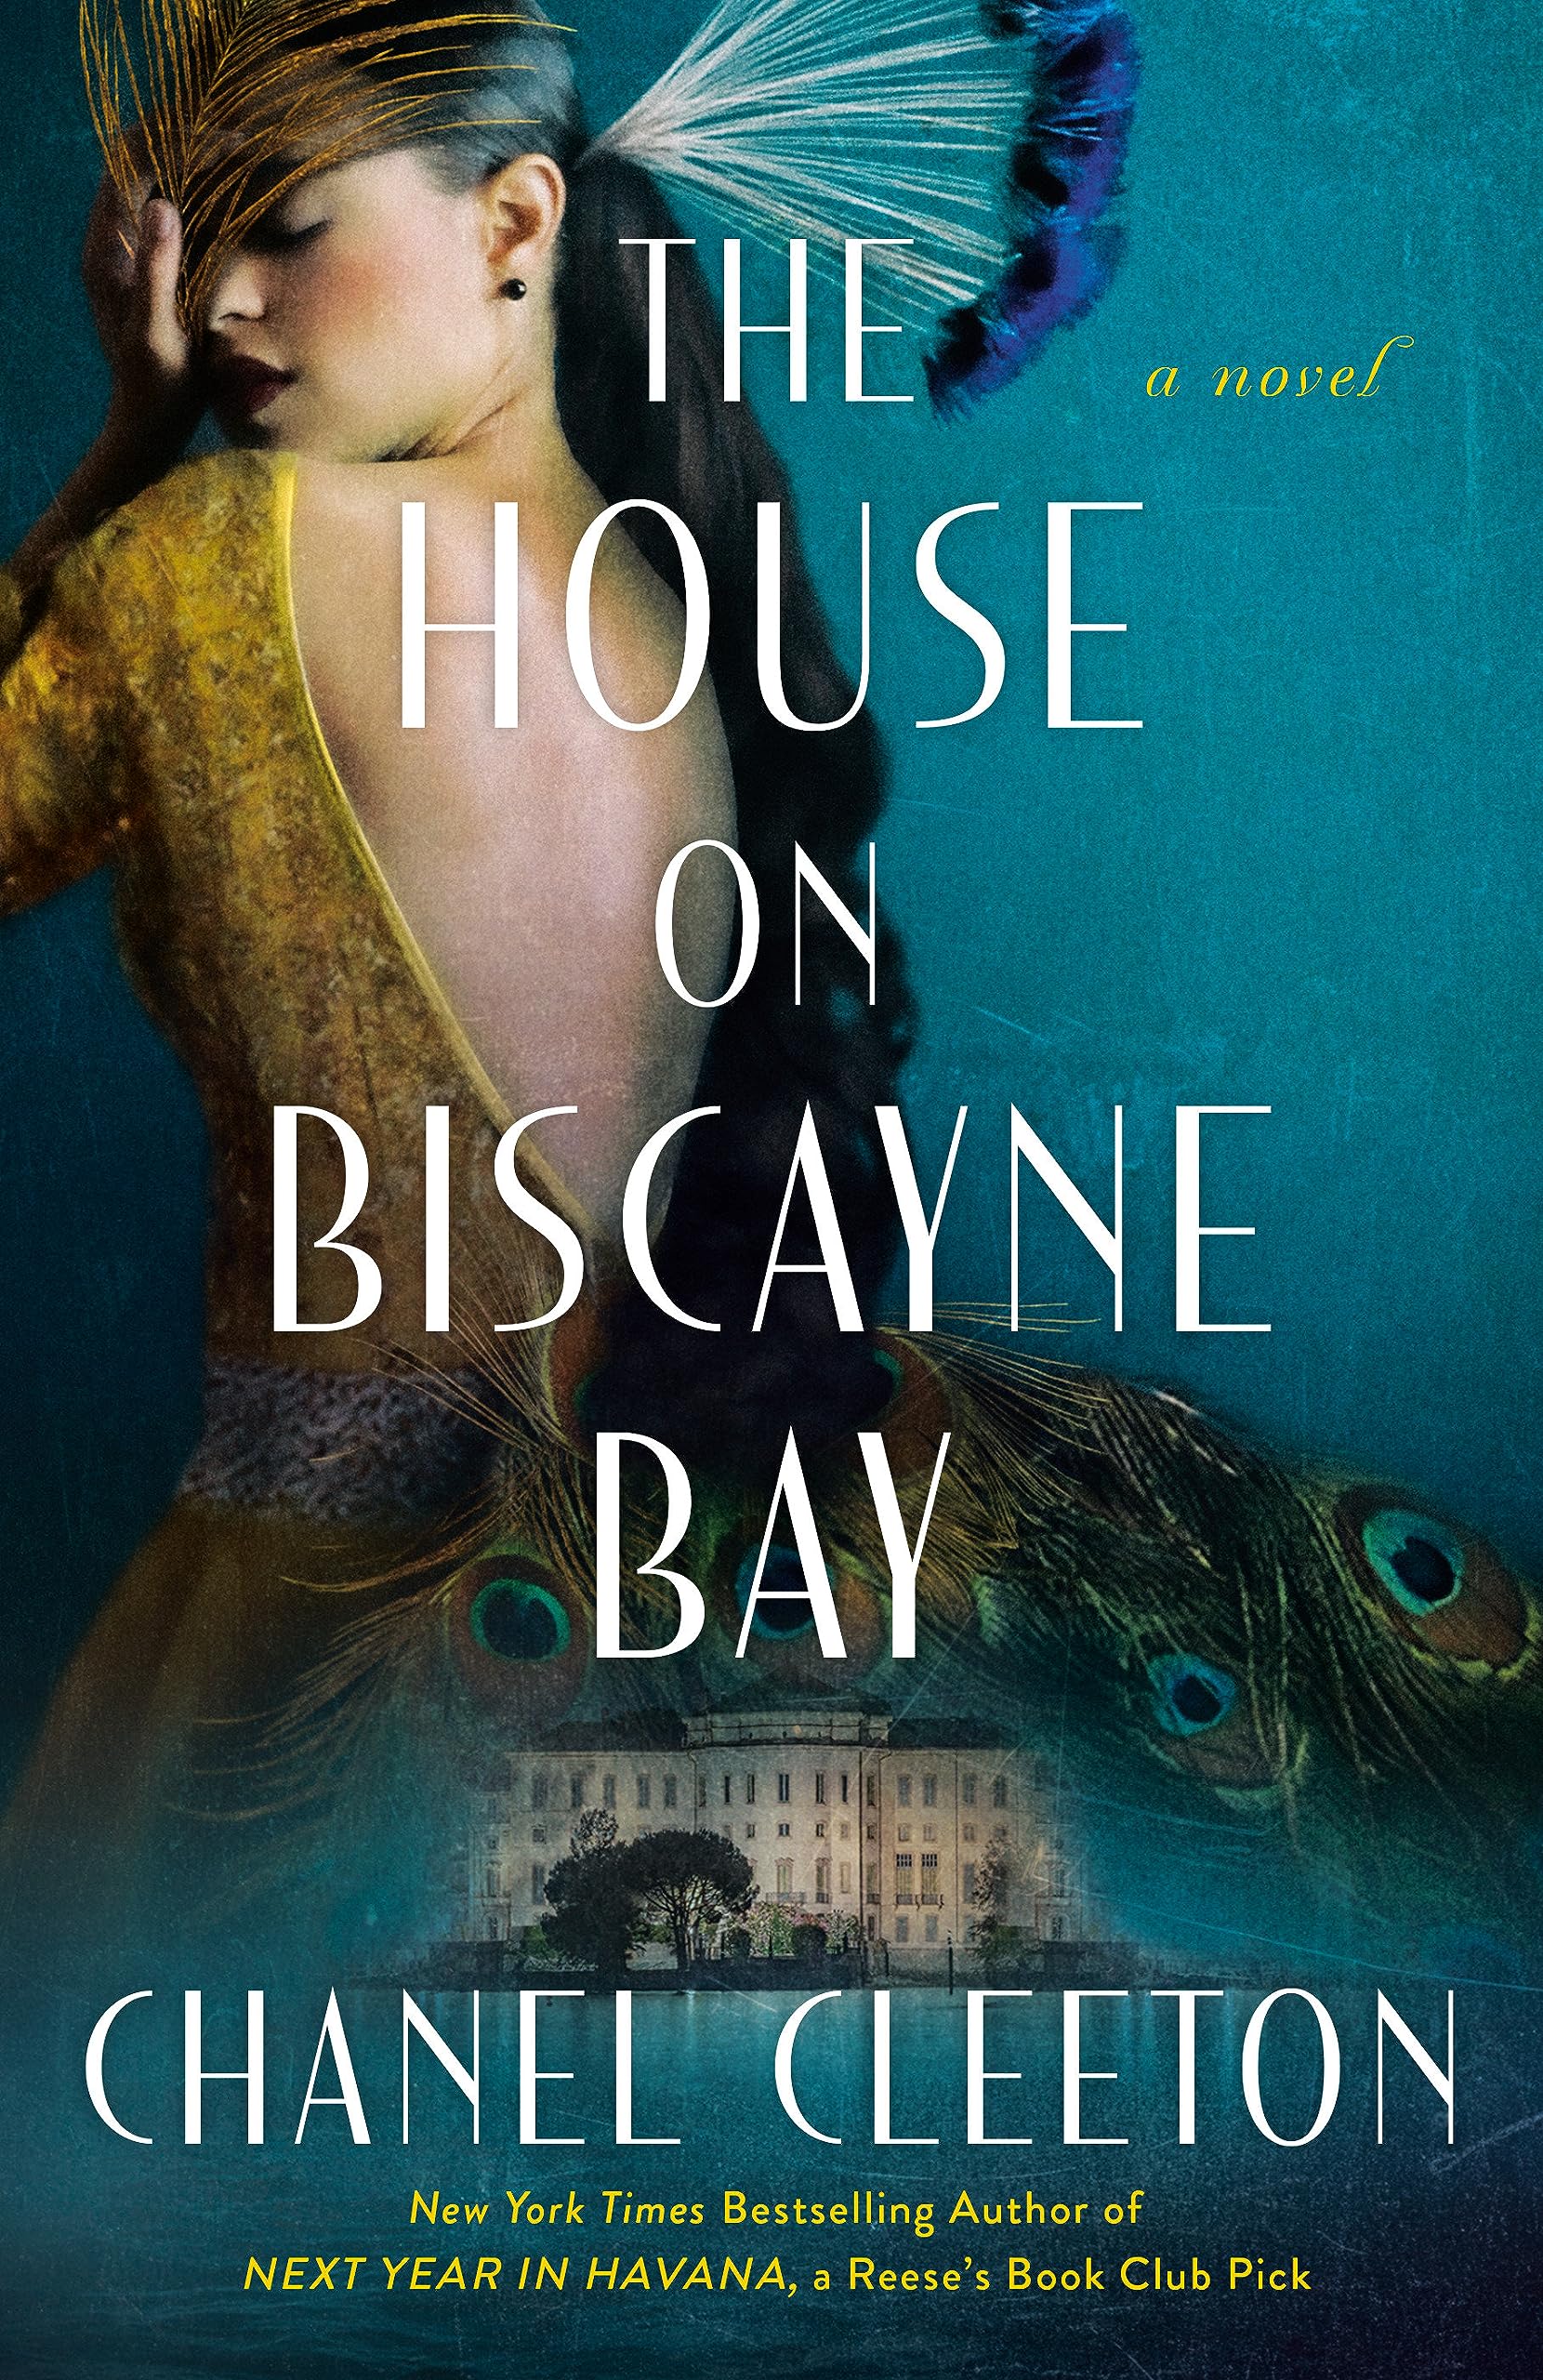 The House on Biscayne Bay by Chanel Cleeton book cover